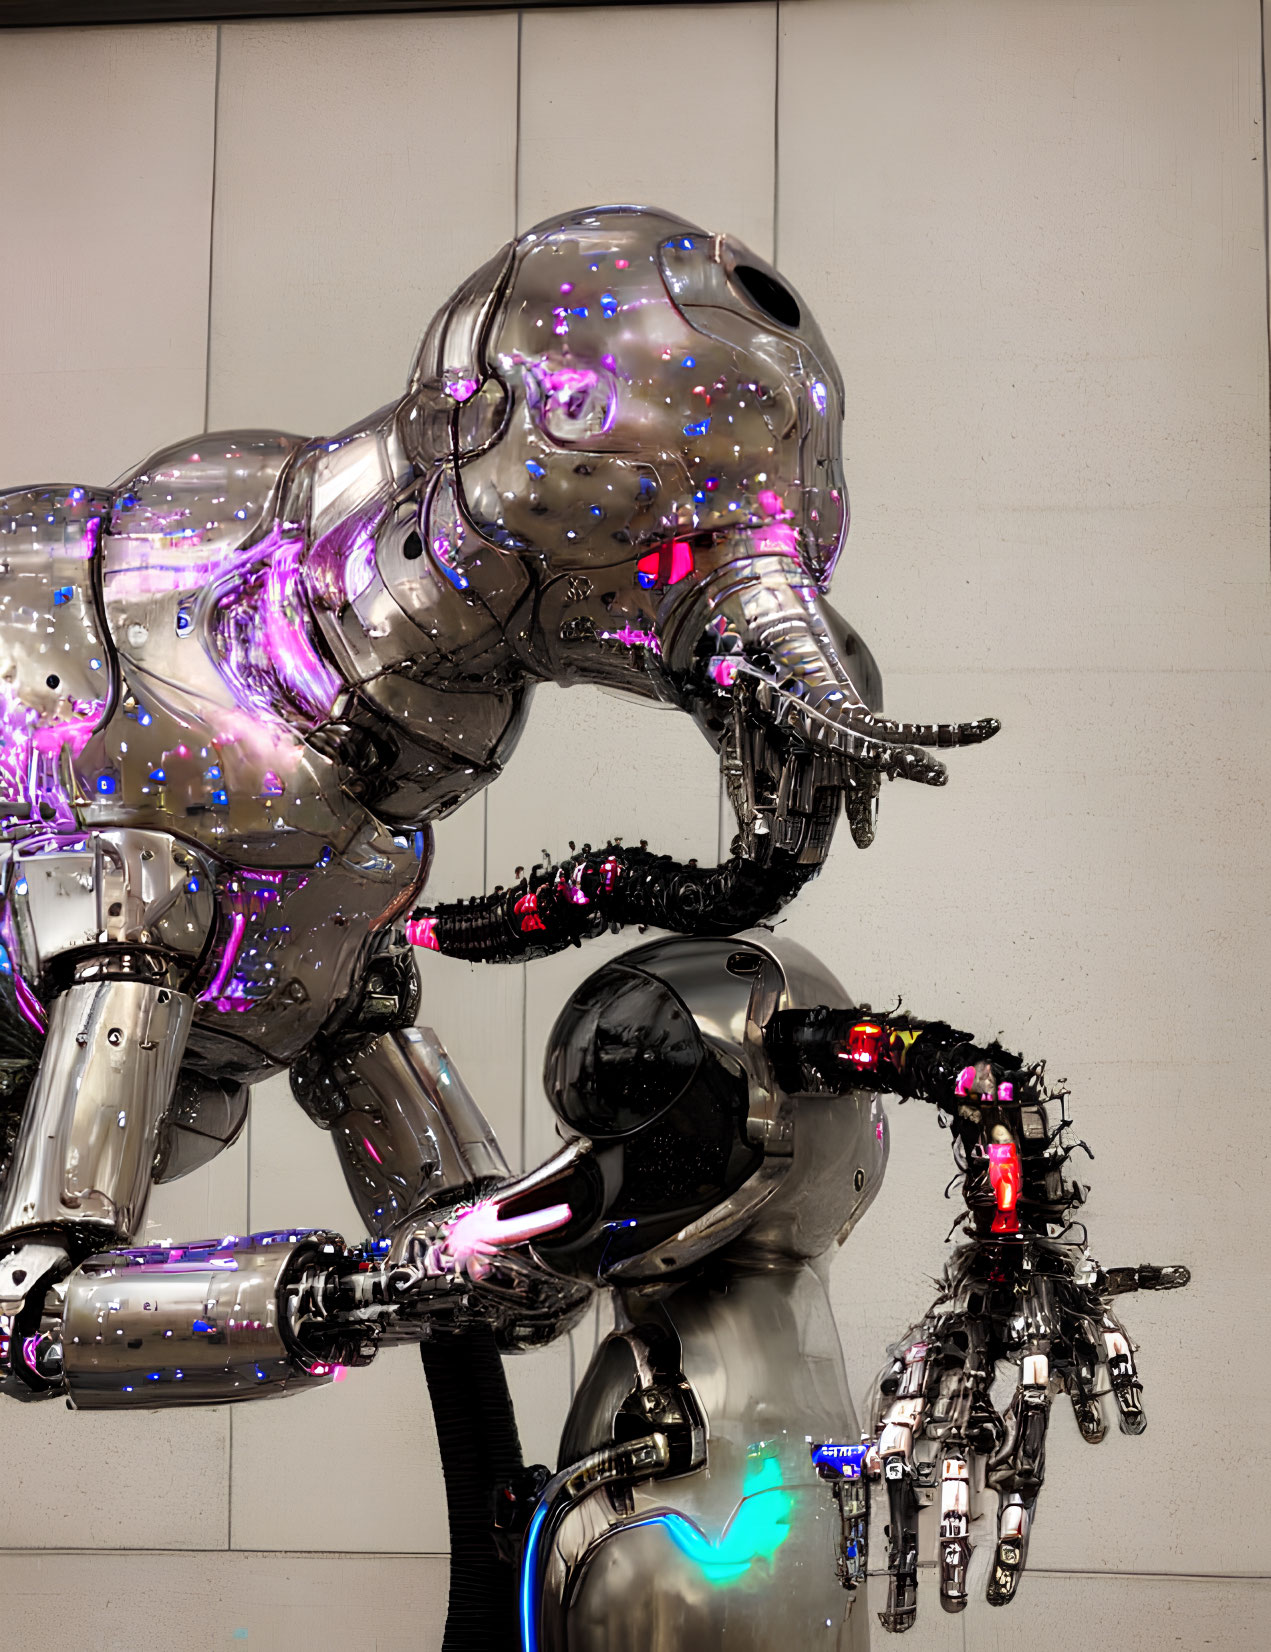 Futuristic metallic elephant sculpture with glowing purple accents